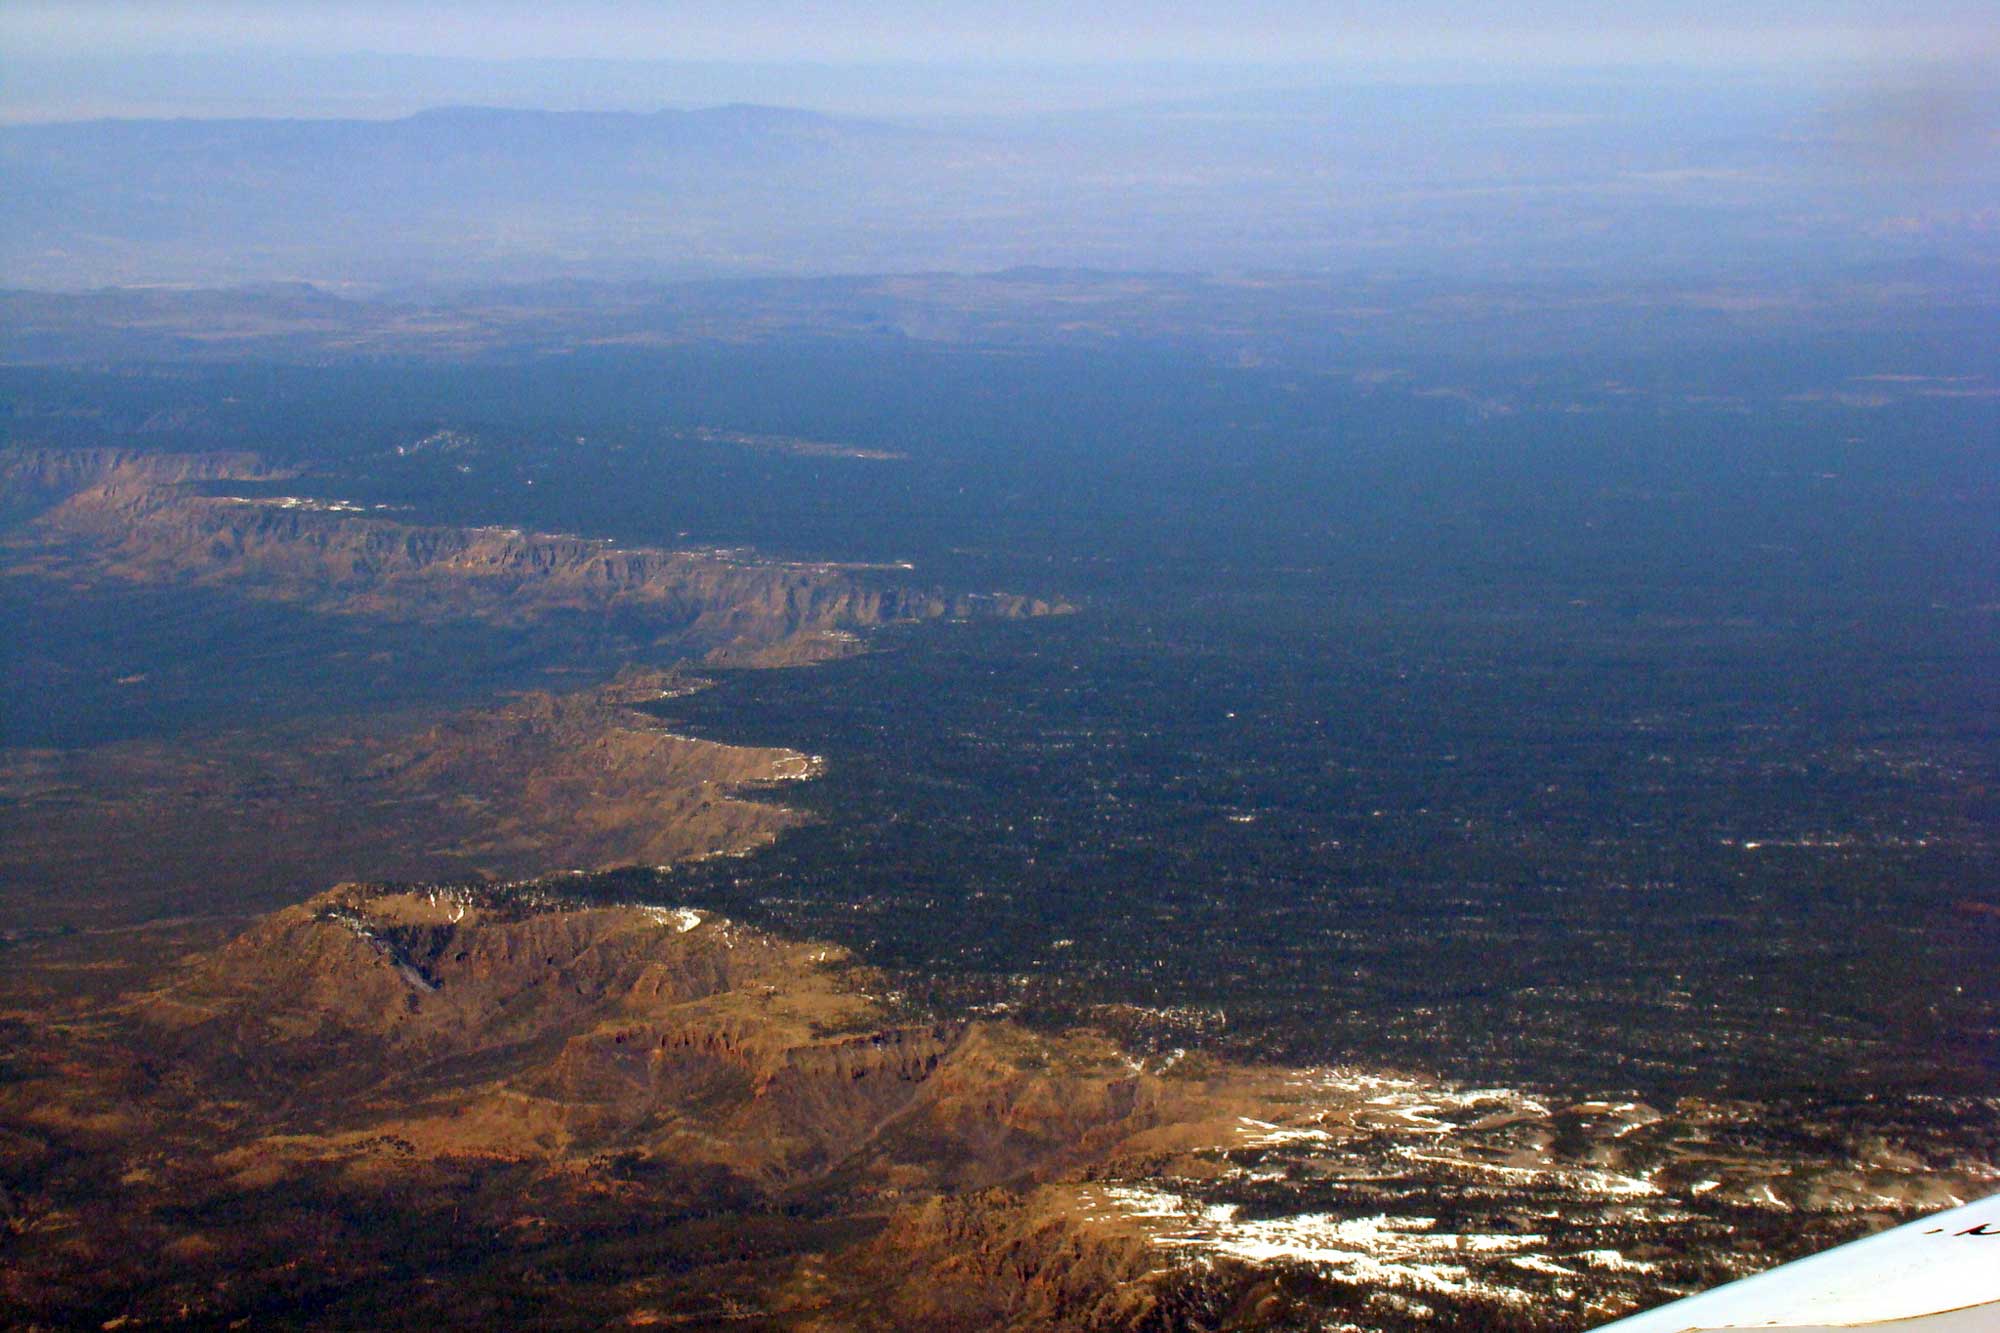 Photograph from an airplane of the Mogollon Rim in Arizona.